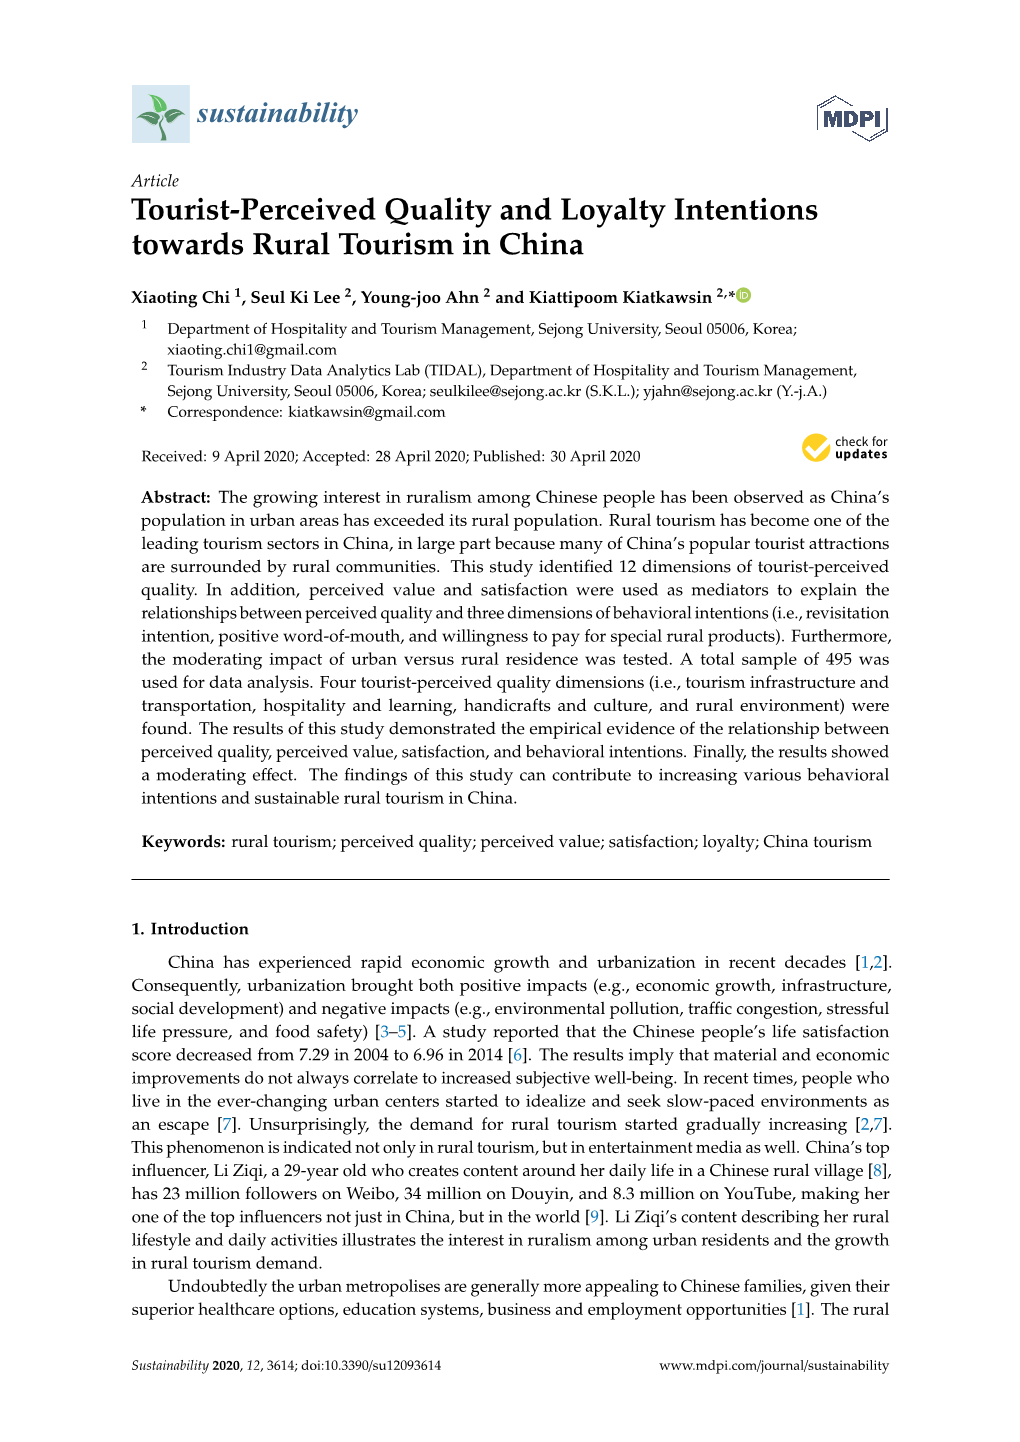 Tourist-Perceived Quality and Loyalty Intentions Towards Rural Tourism in China